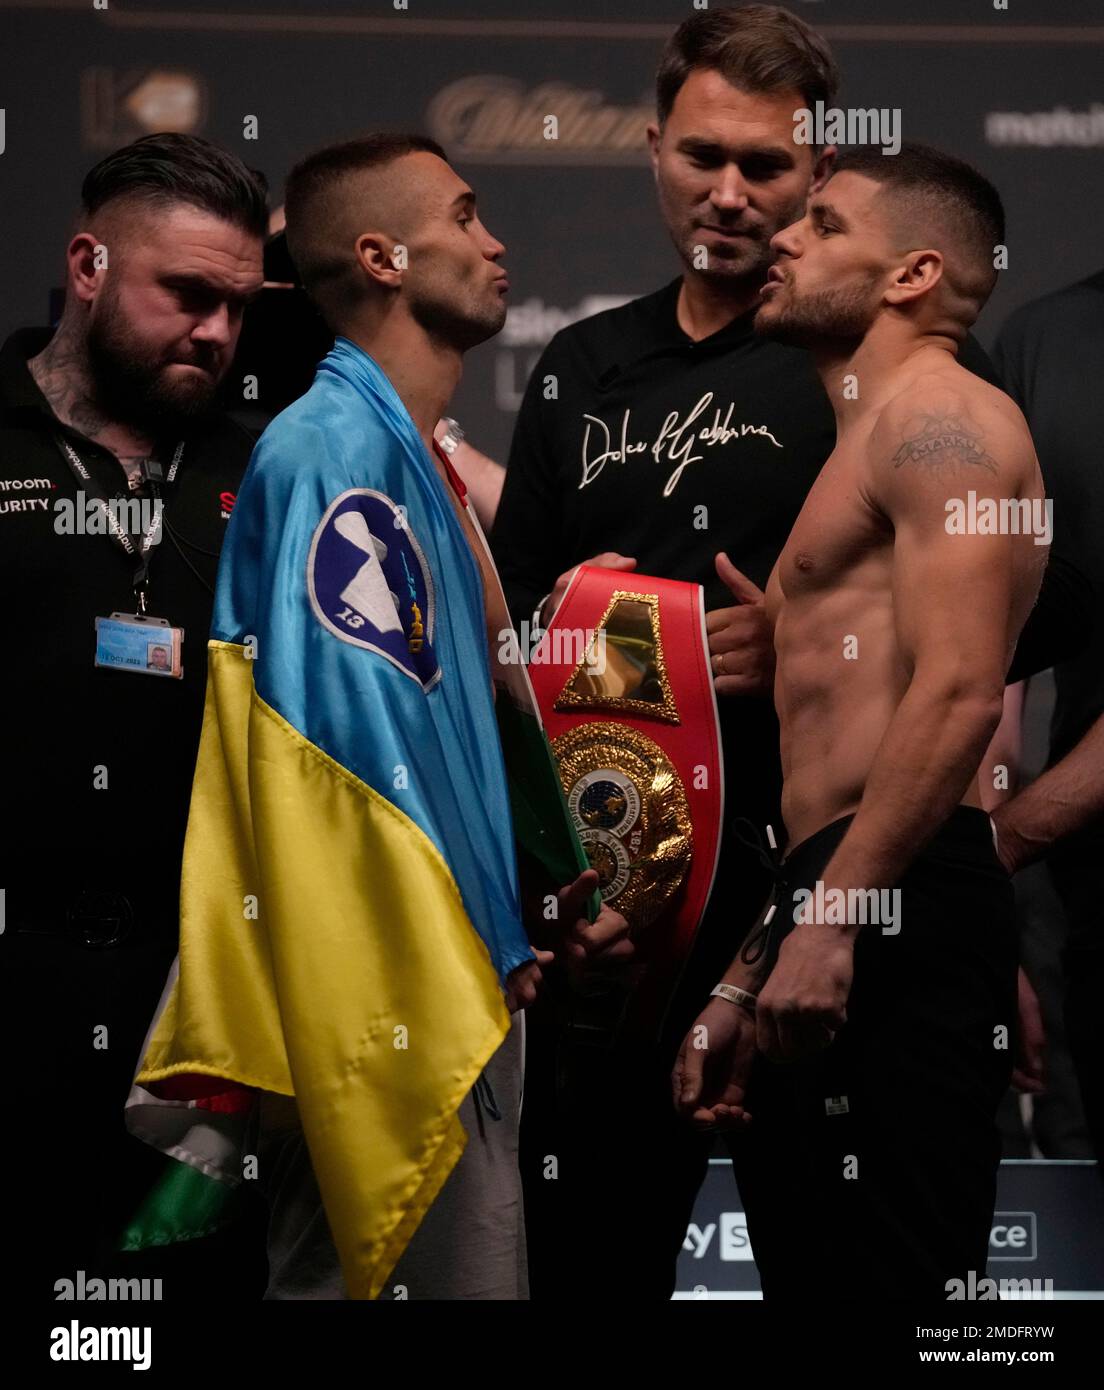 Florian Marku of Albania, right, faces Maxim Prodan, of the Ukraine during the official weigh in ahead of their upcoming boxing match, at the O2 Arena in London, Friday, Sept